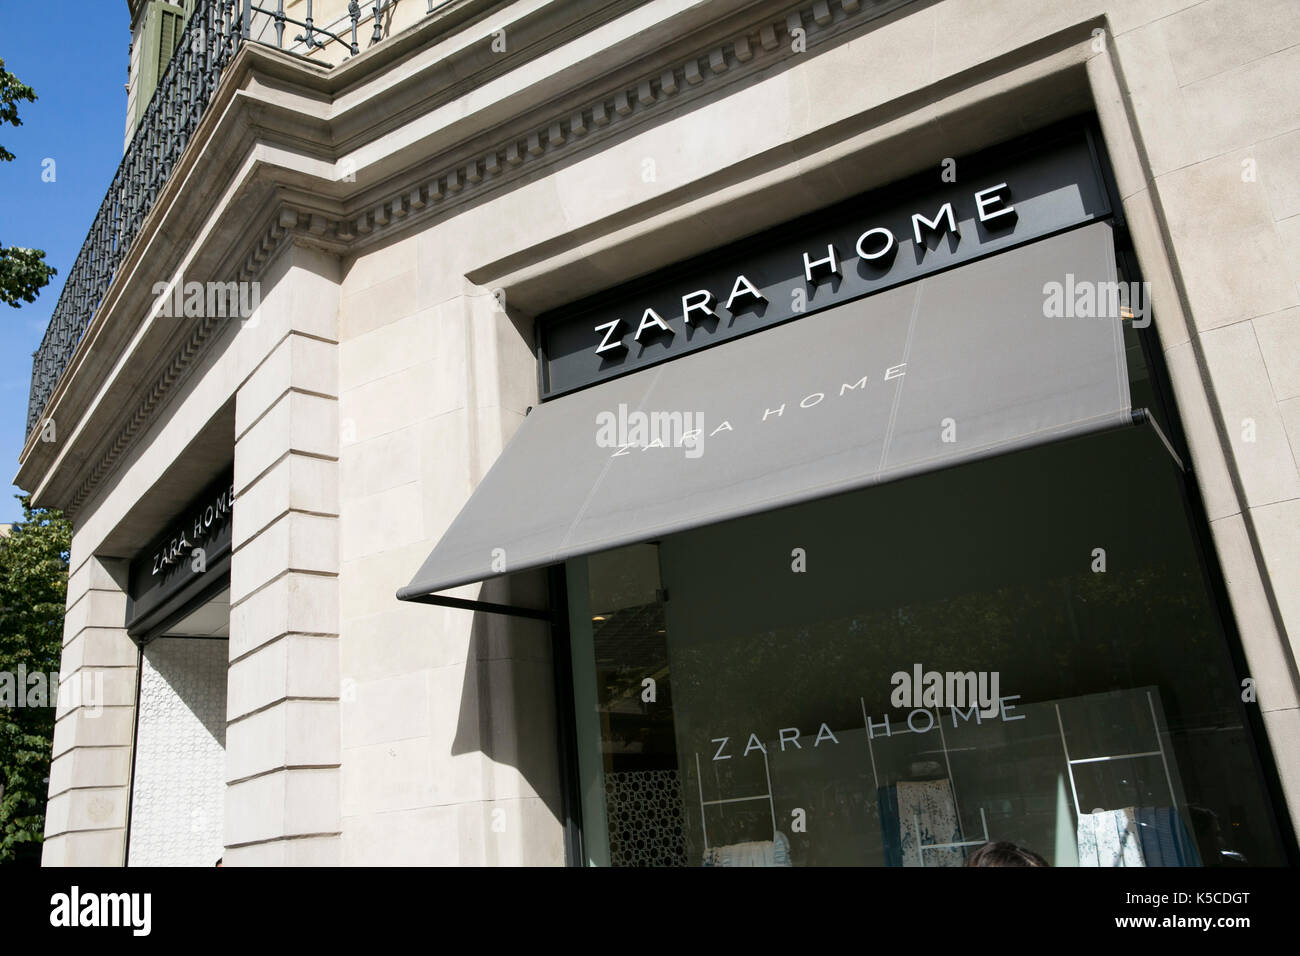 Zara Storefront High Resolution Stock Photography and Images - Alamy